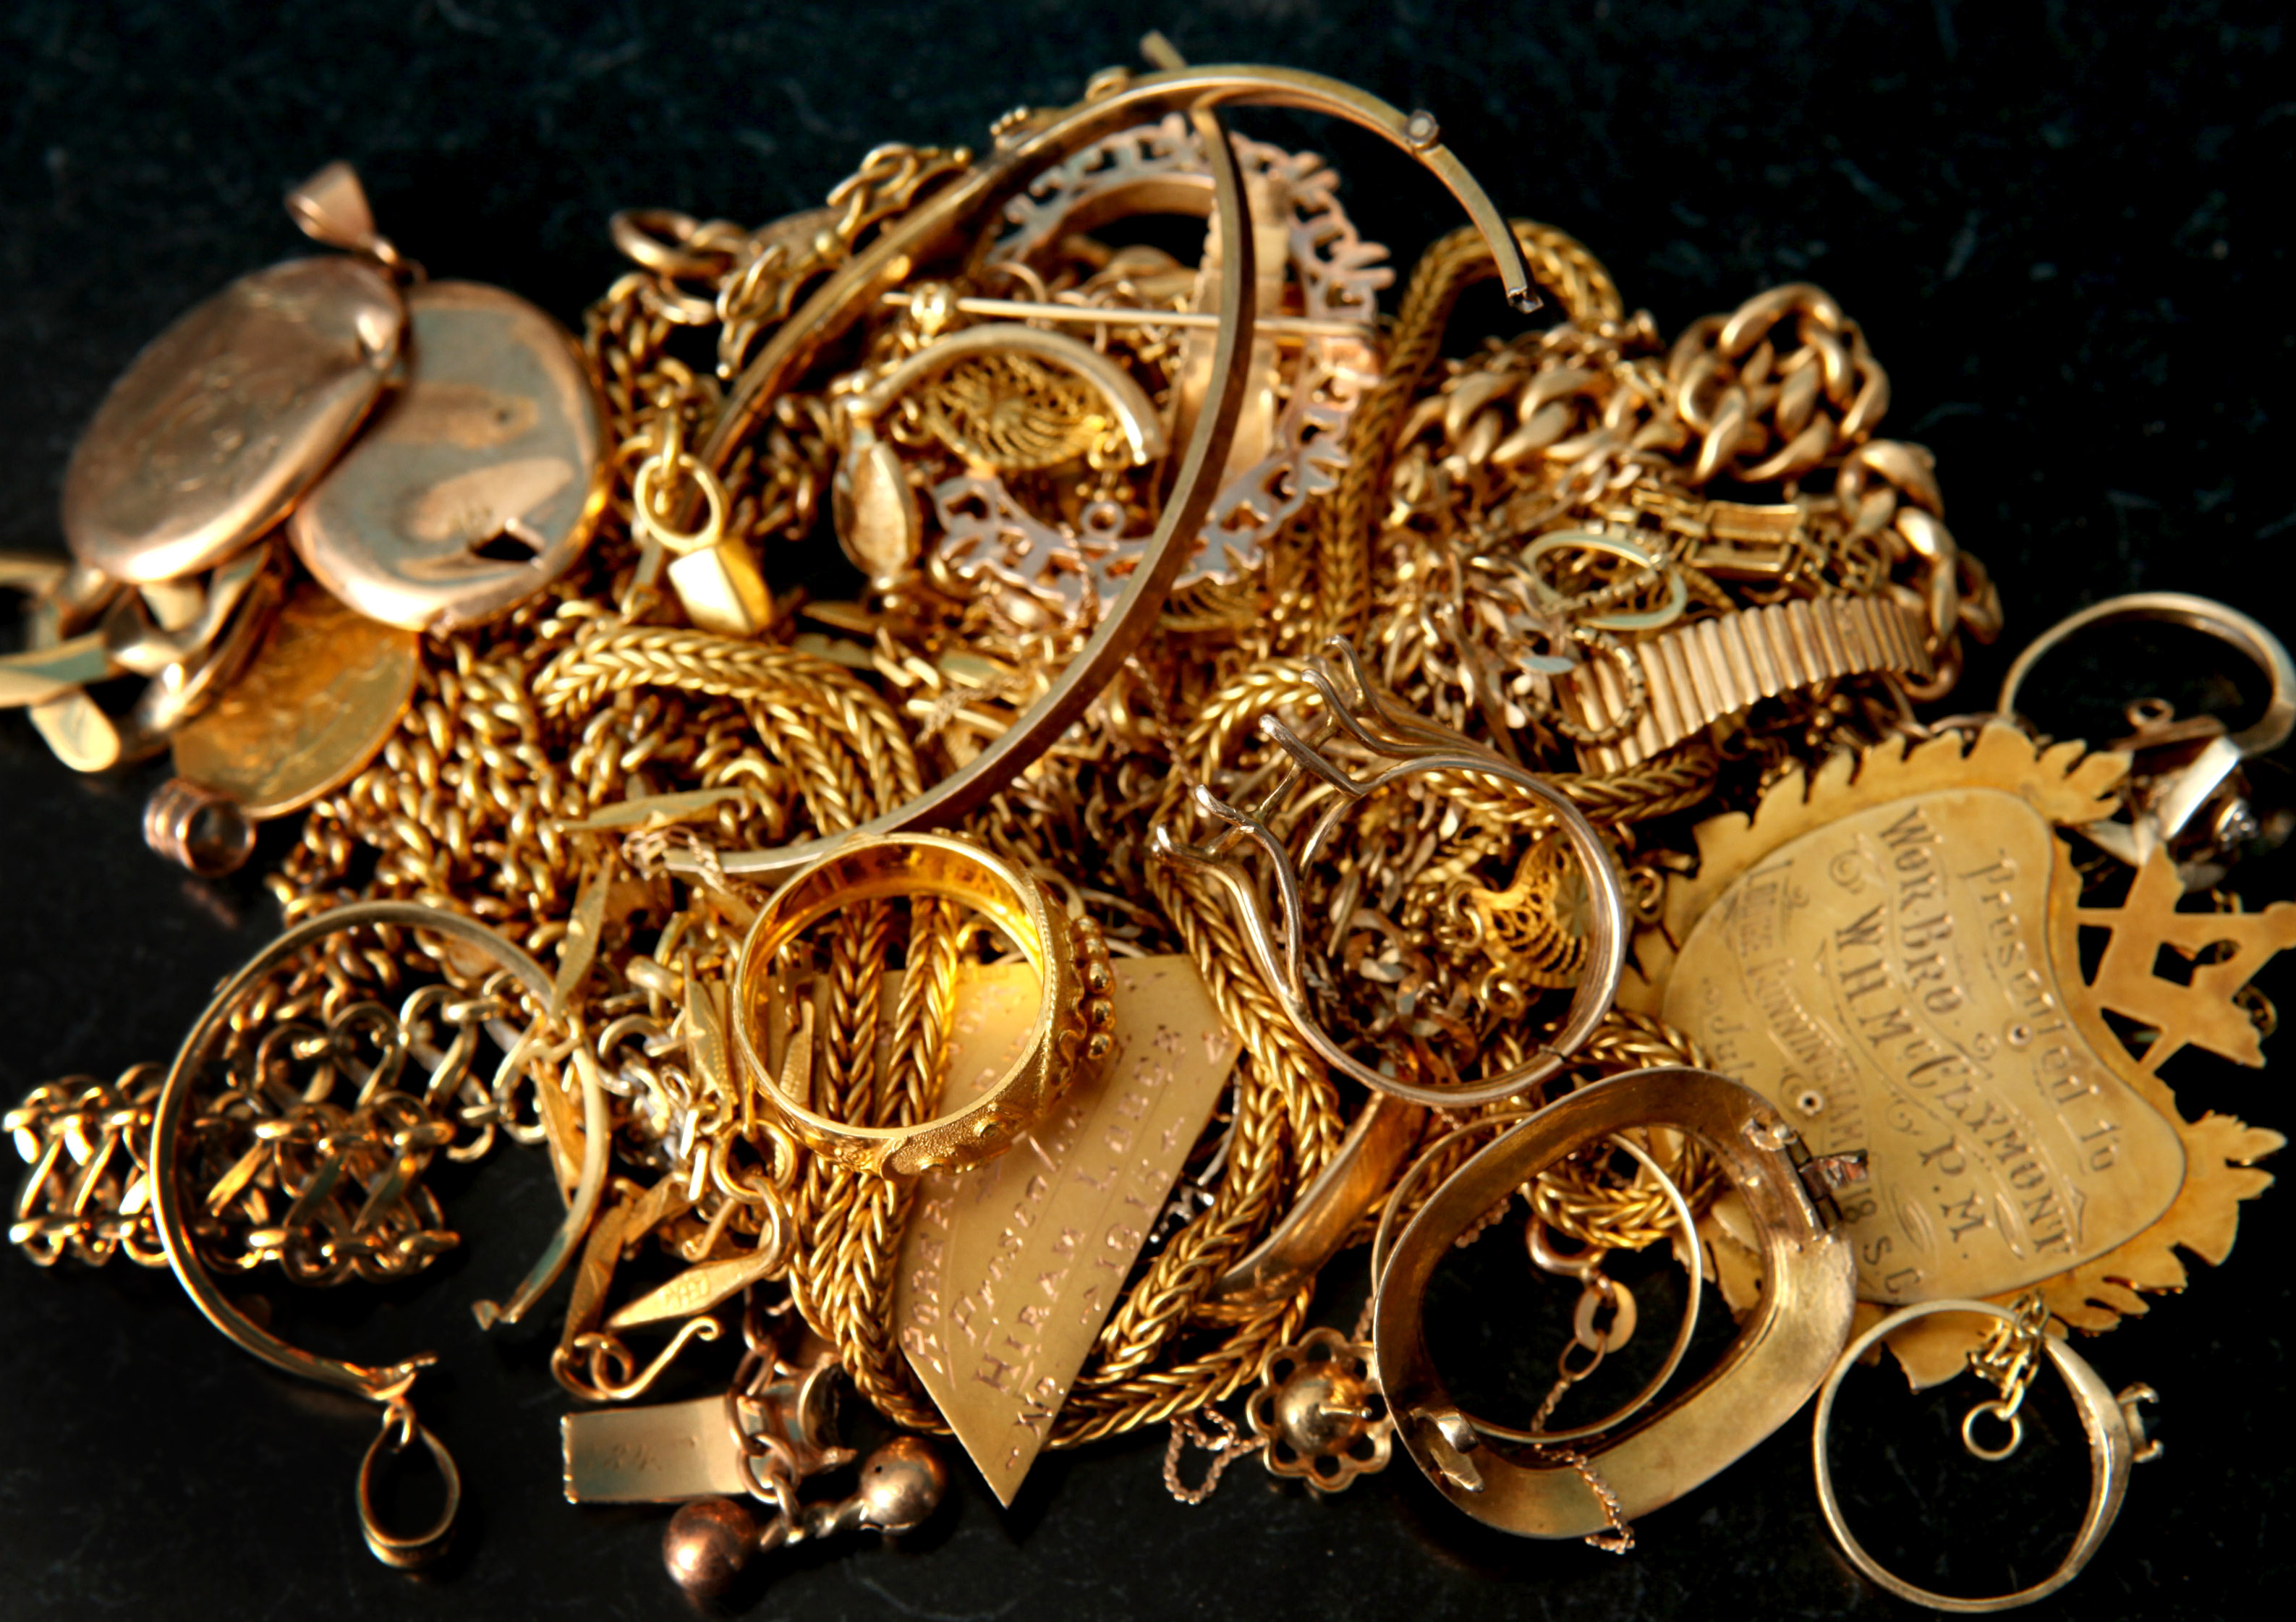 Get The Best Price For Your Scrap Gold Jewellery With Pmt Refinery